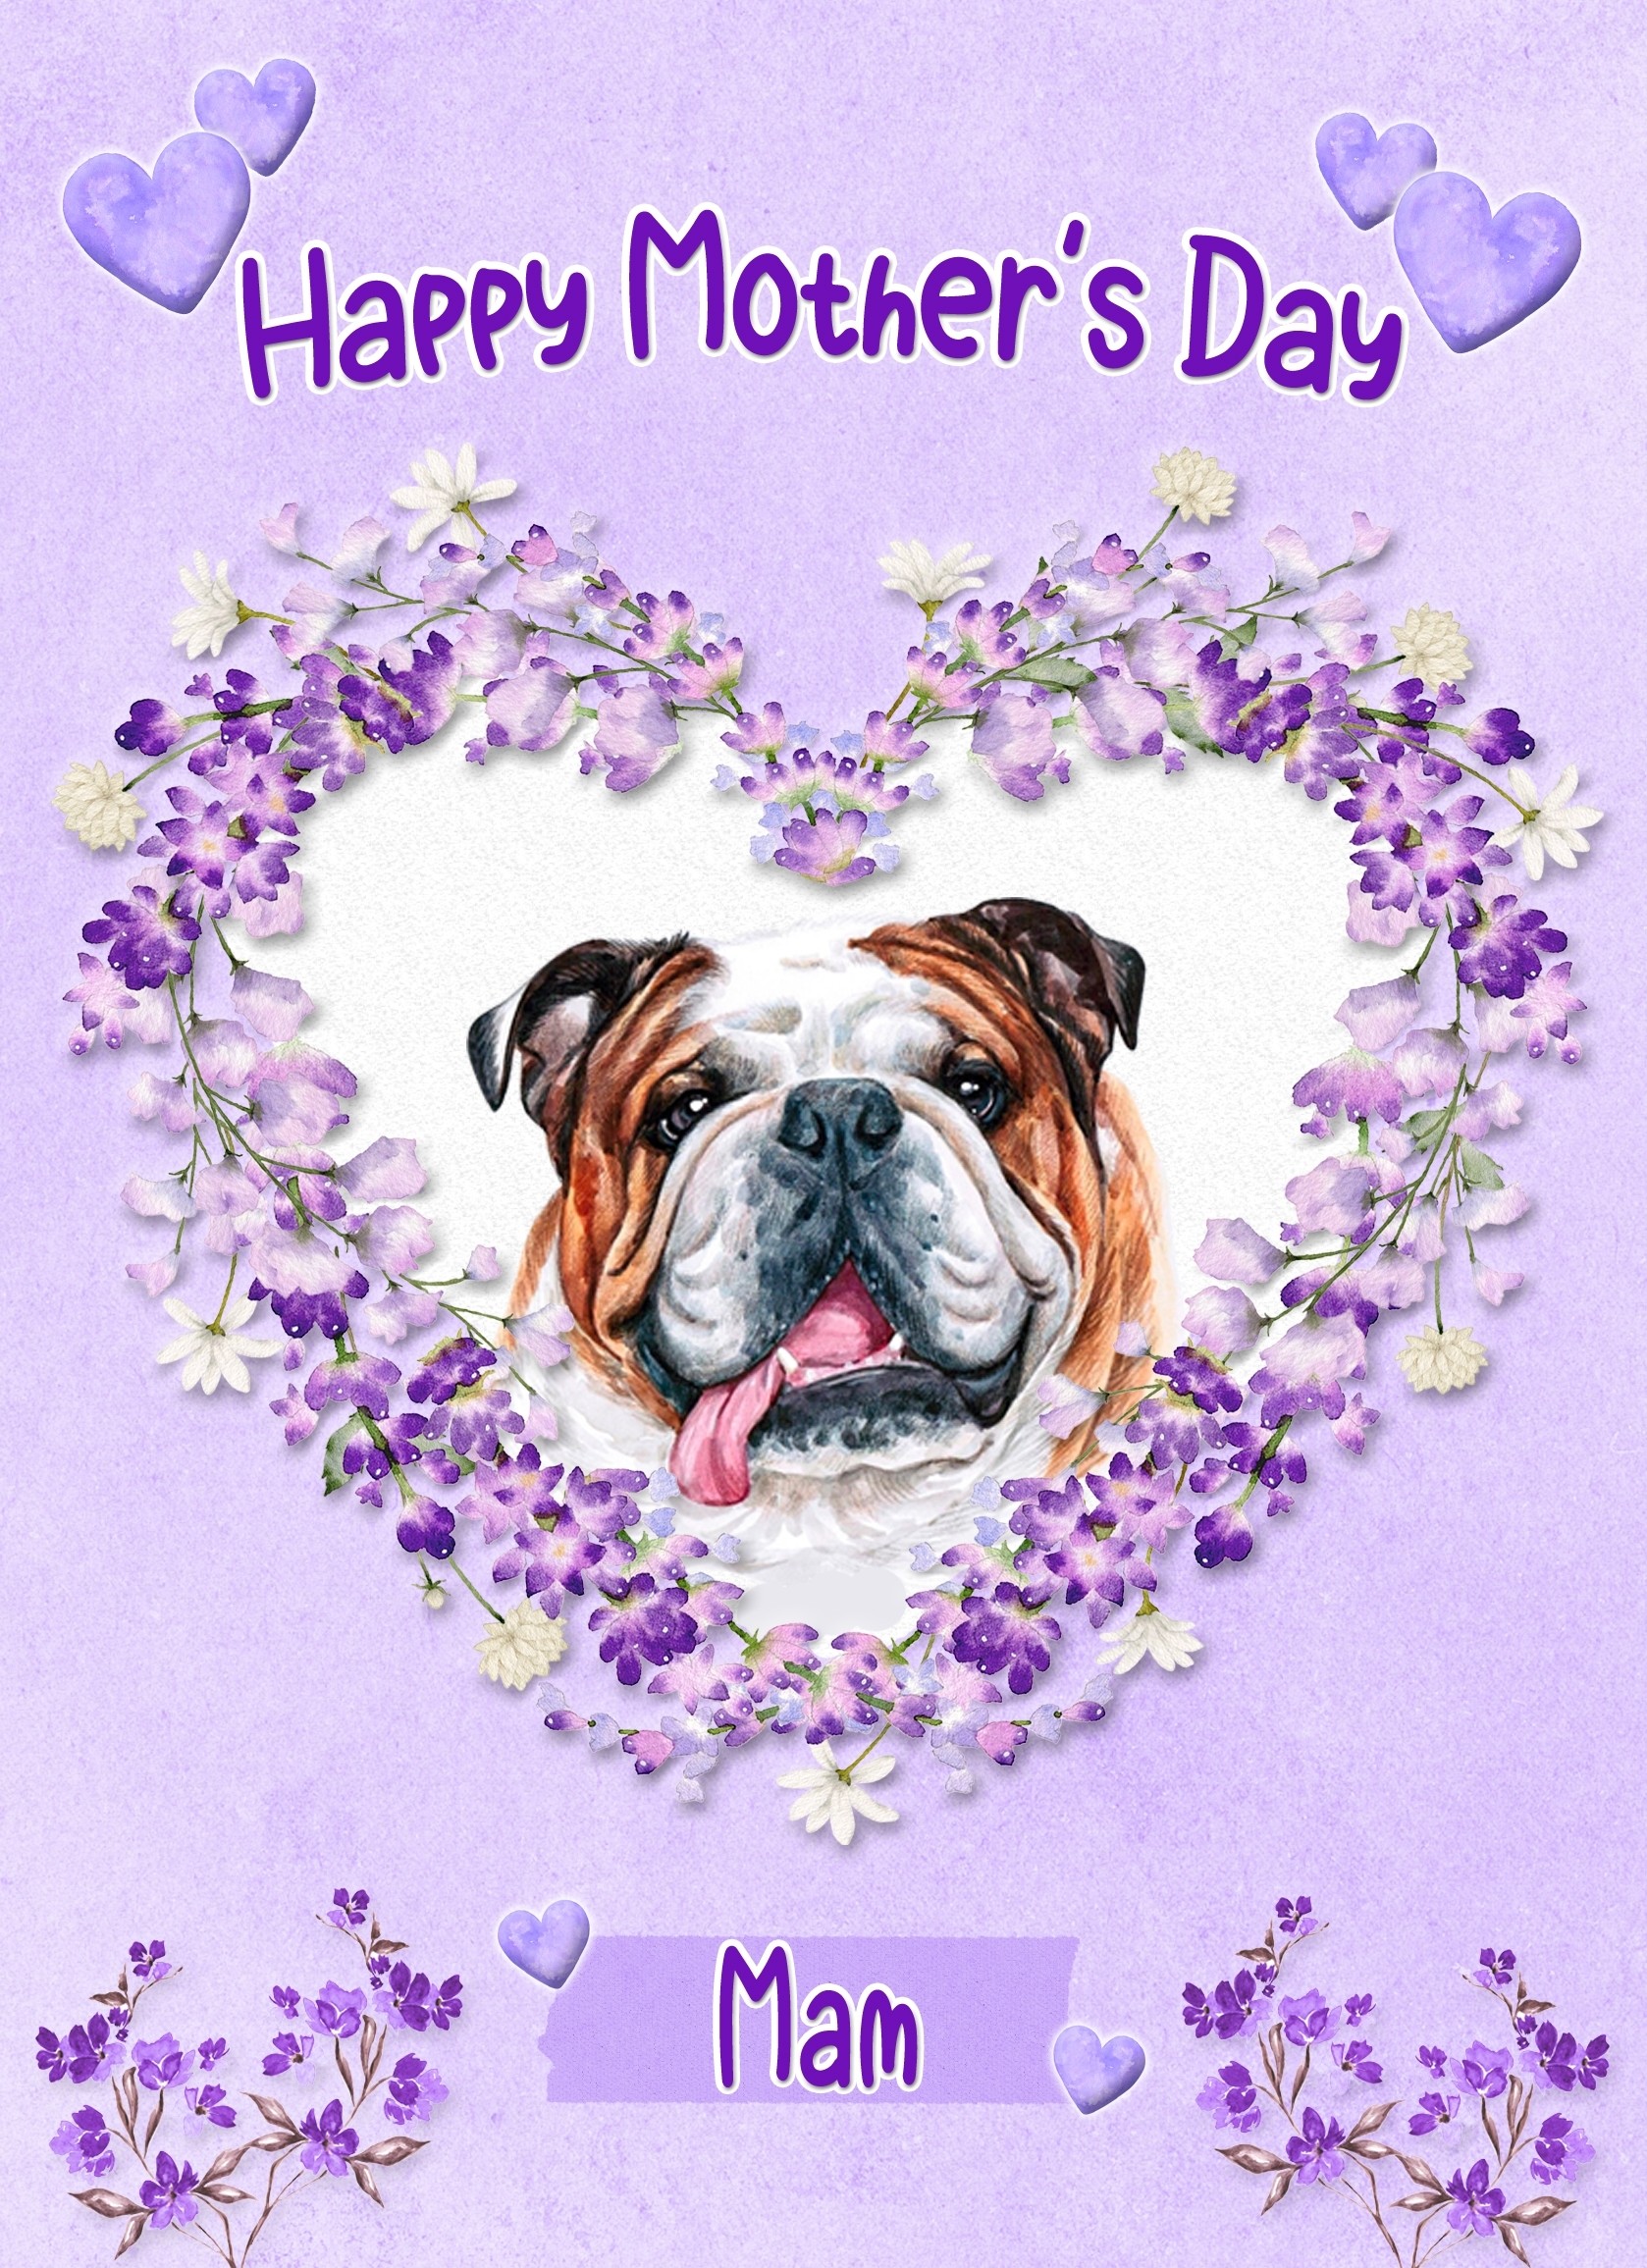 Bulldog Dog Mothers Day Card (Happy Mothers, Mam)